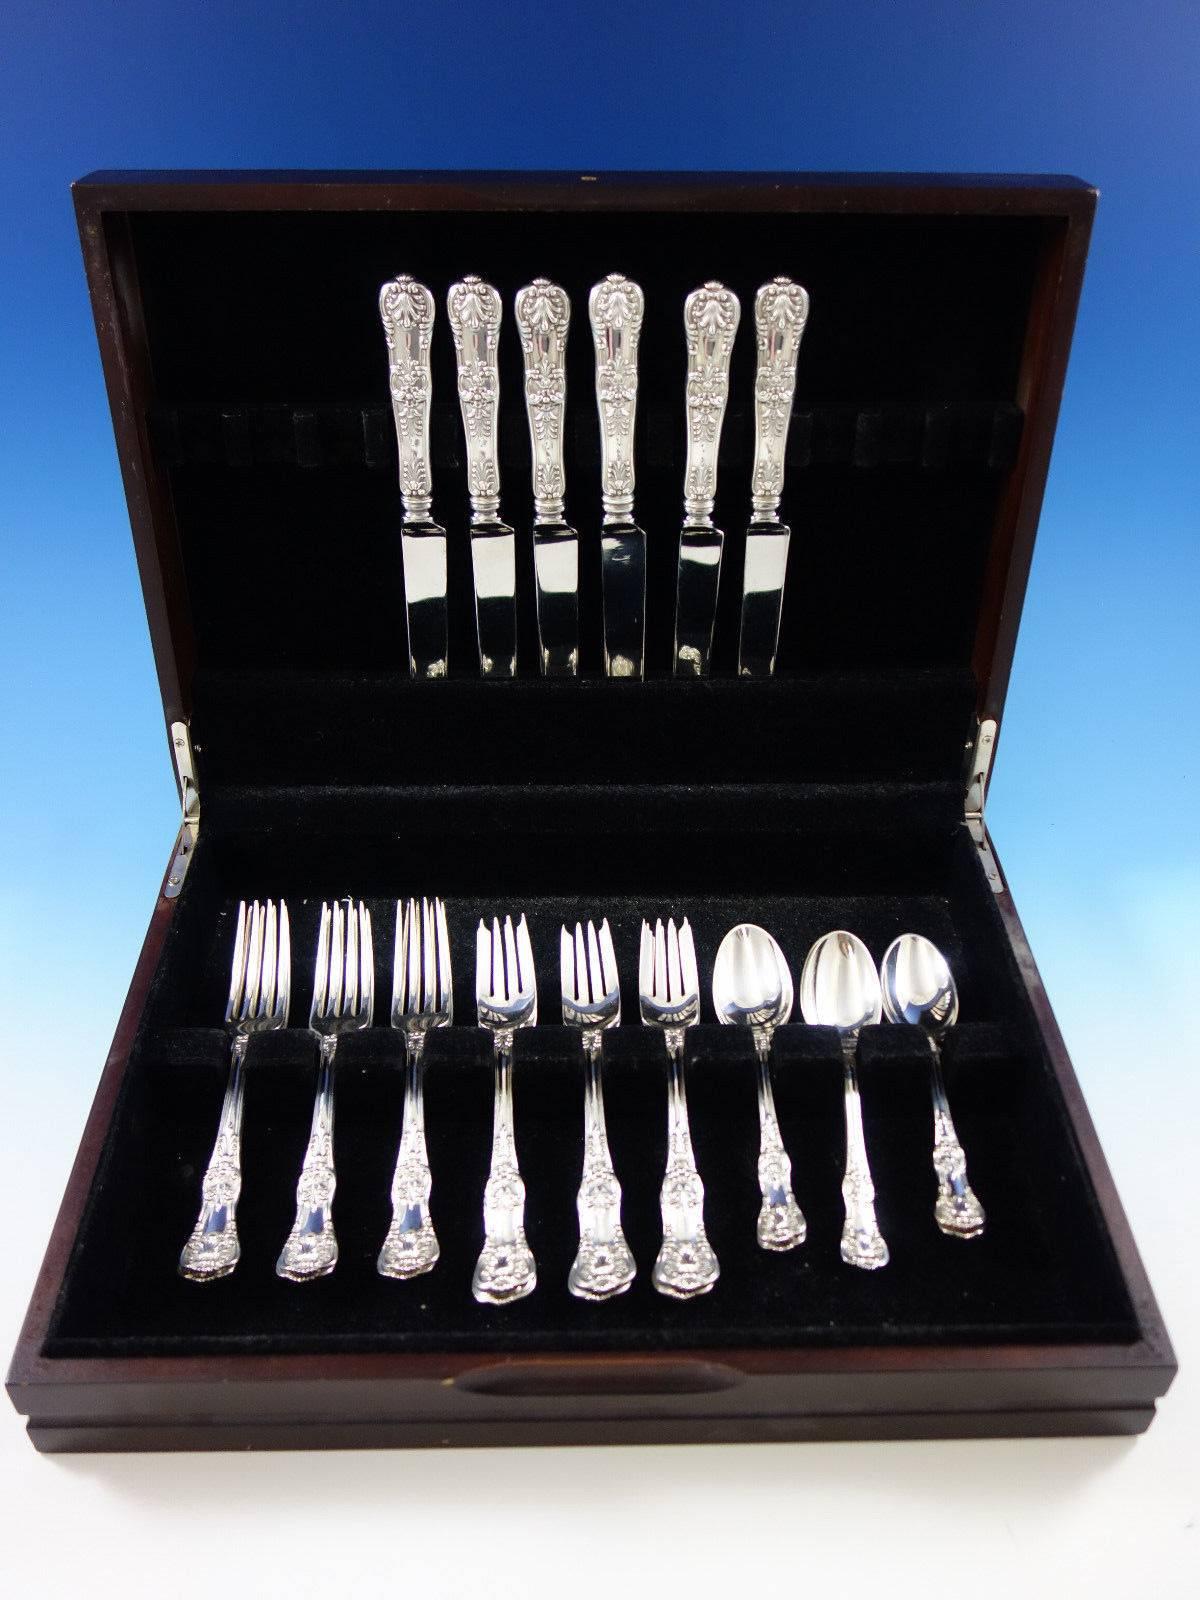 English King by Tiffany & Co. sterling silver flatware set, 24 pieces. This set includes: 6 Knives, 9